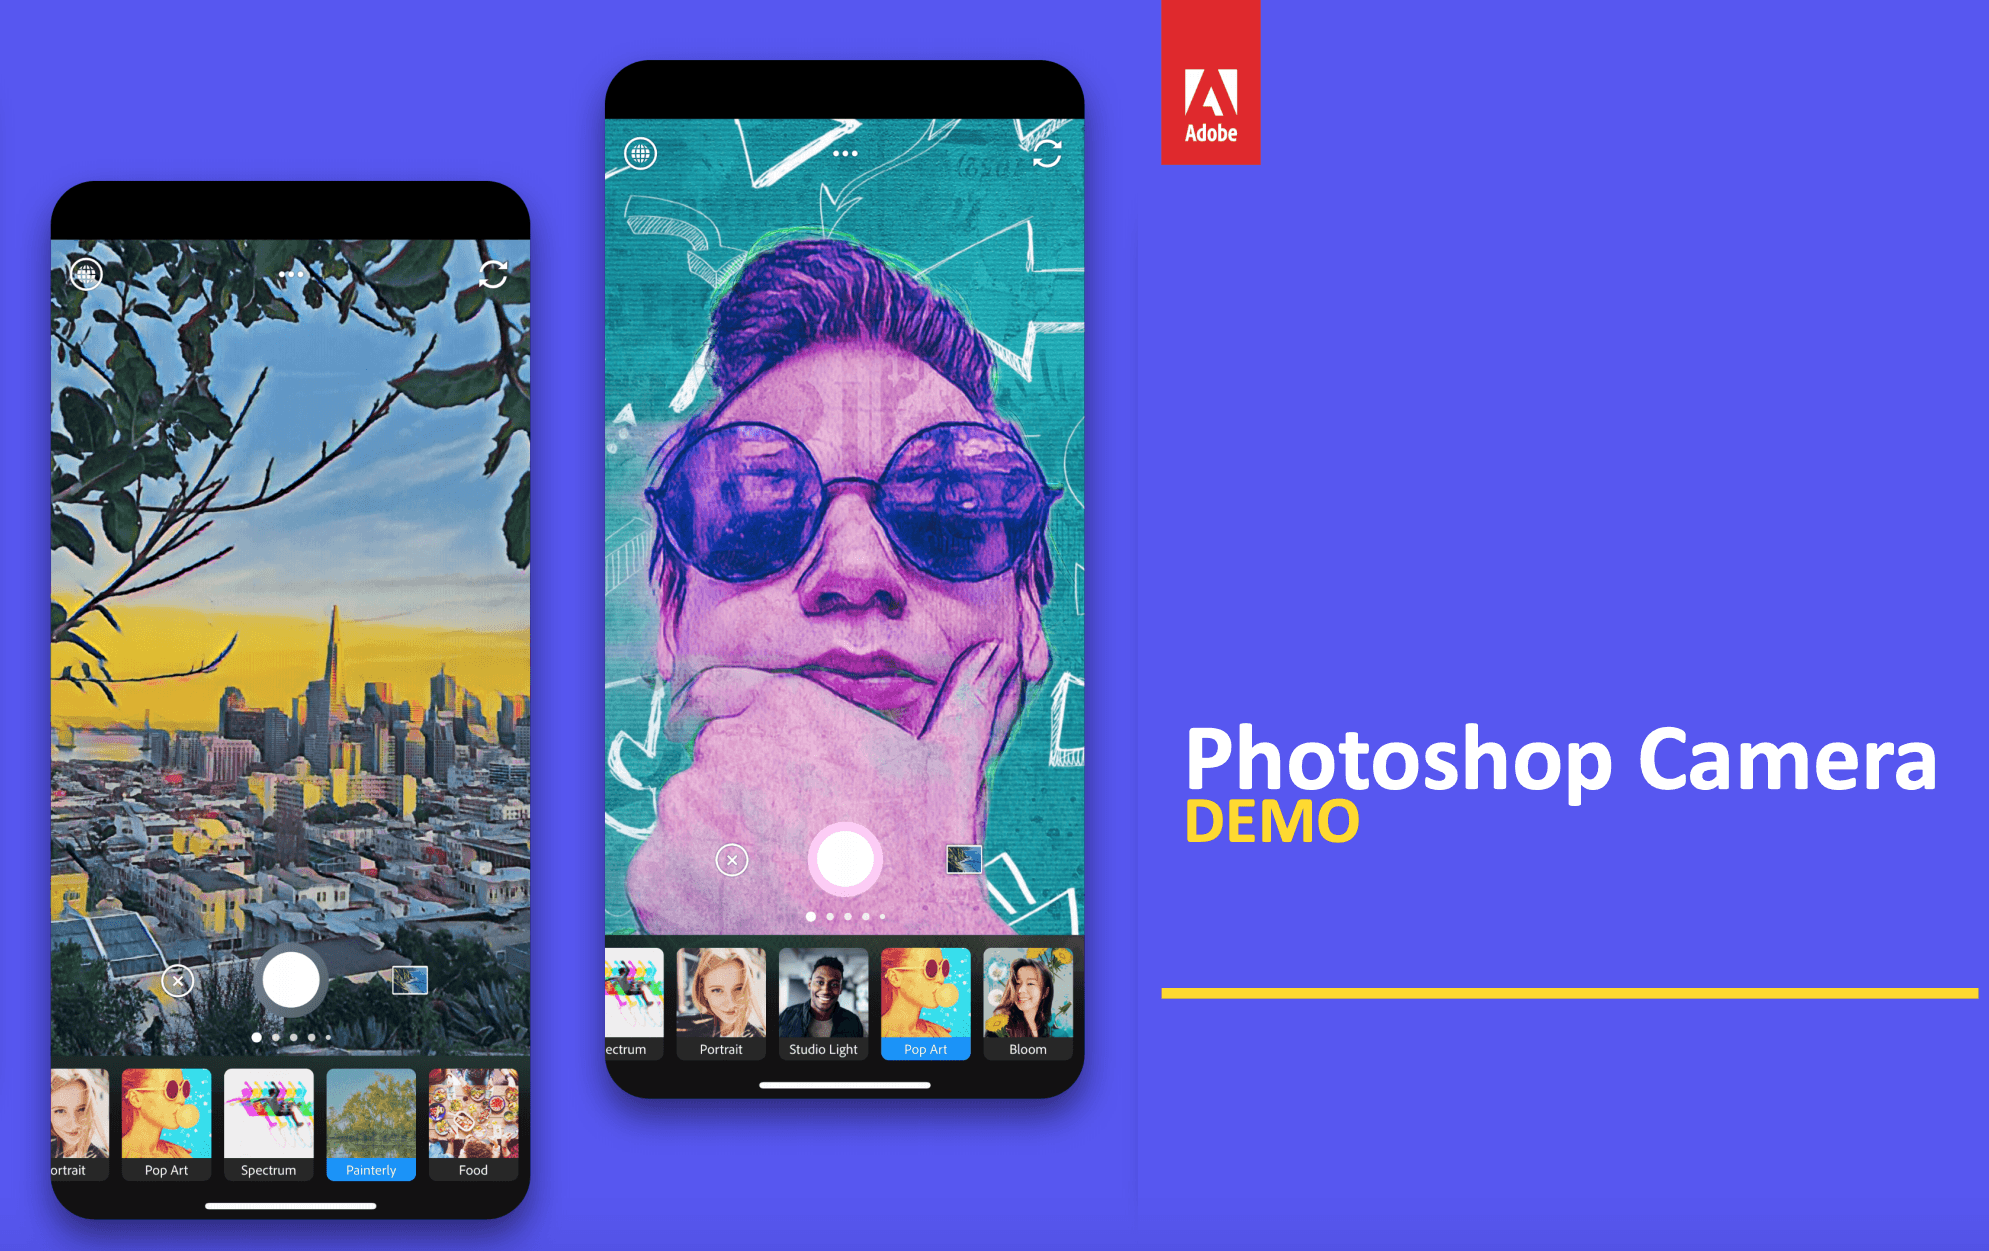 You Can Download The Adobe Photoshop Camera App From Today